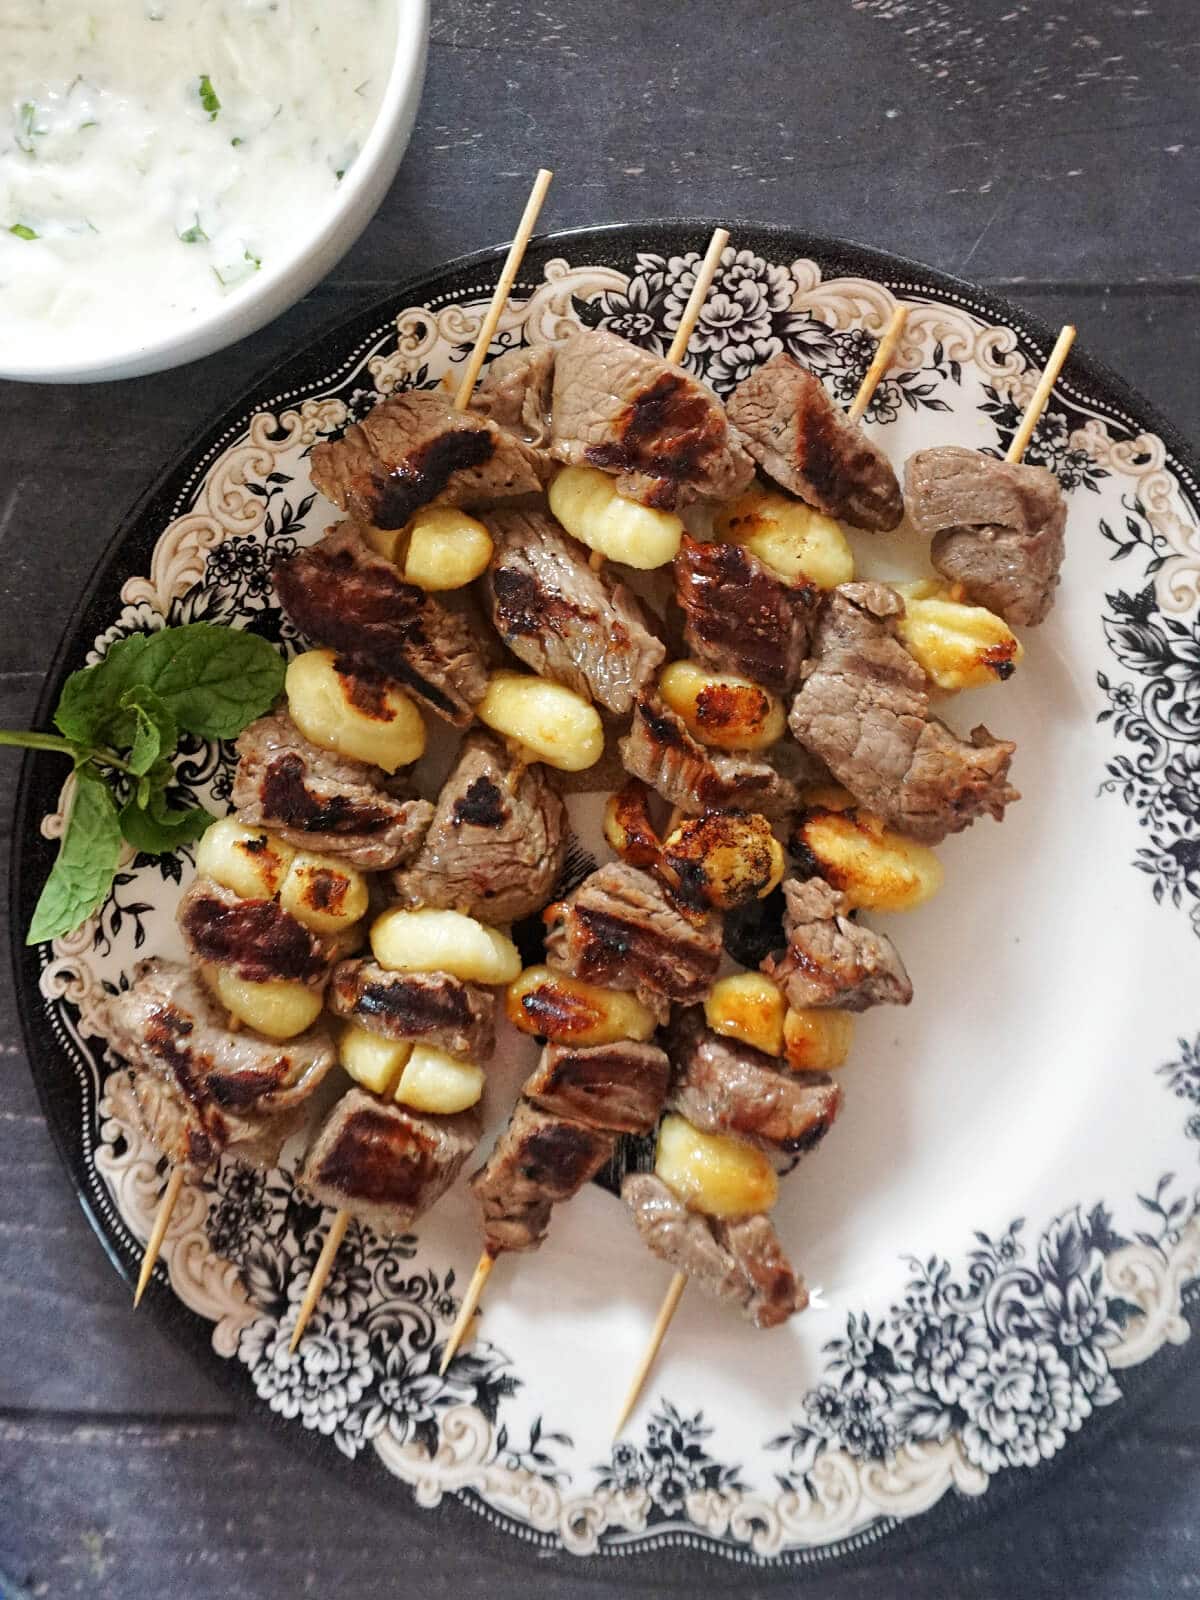 A plate with 4 skewers with gnocchi and beef cubes.